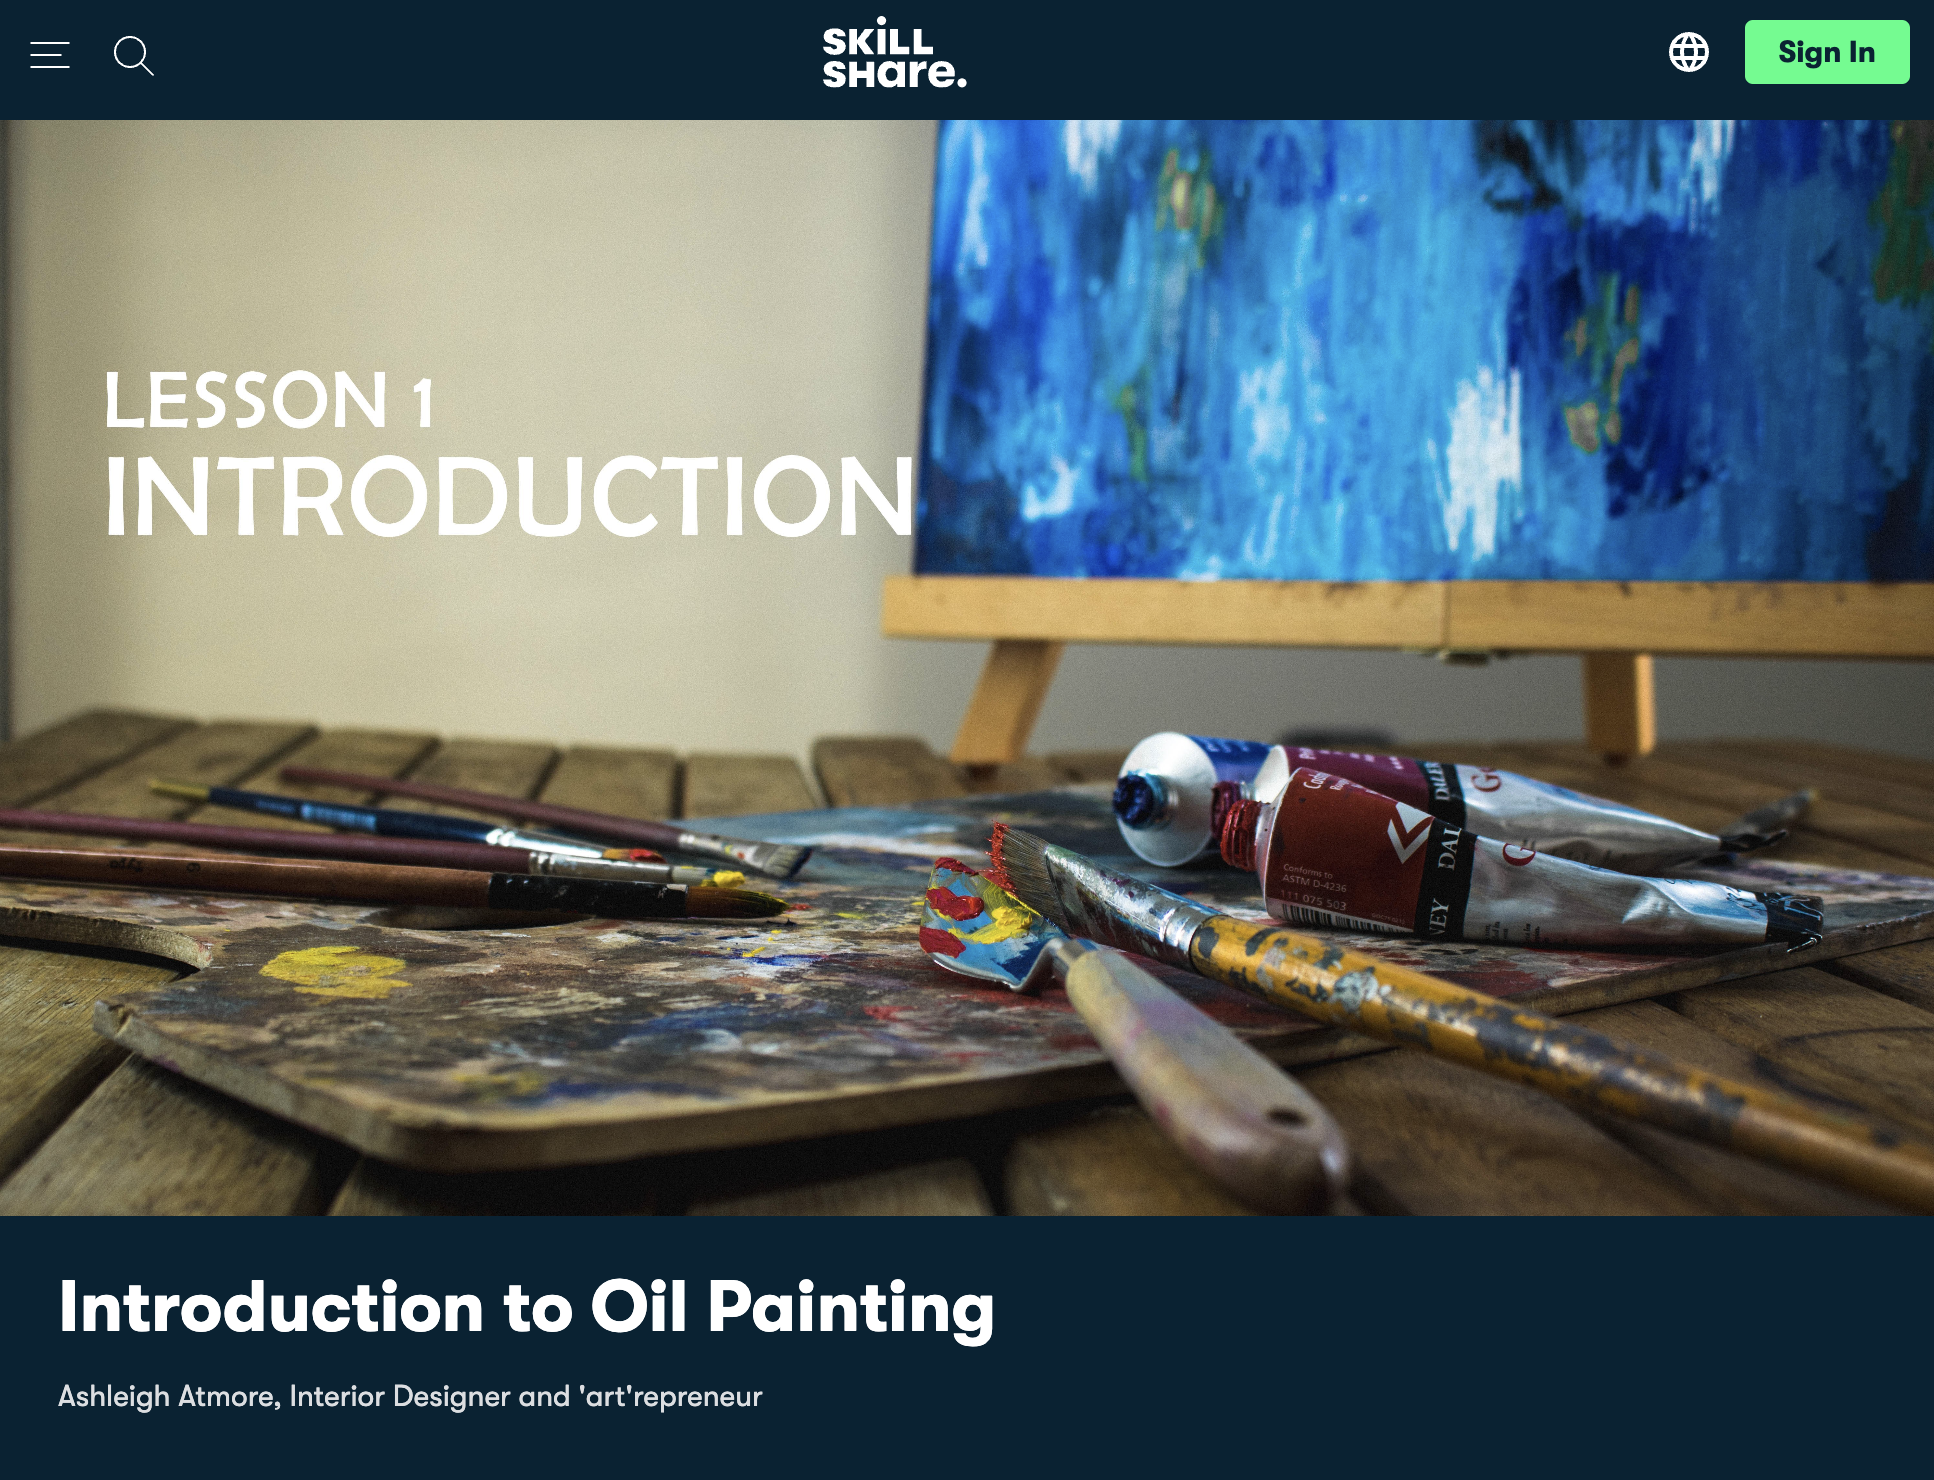 Introduction to Oil Painting